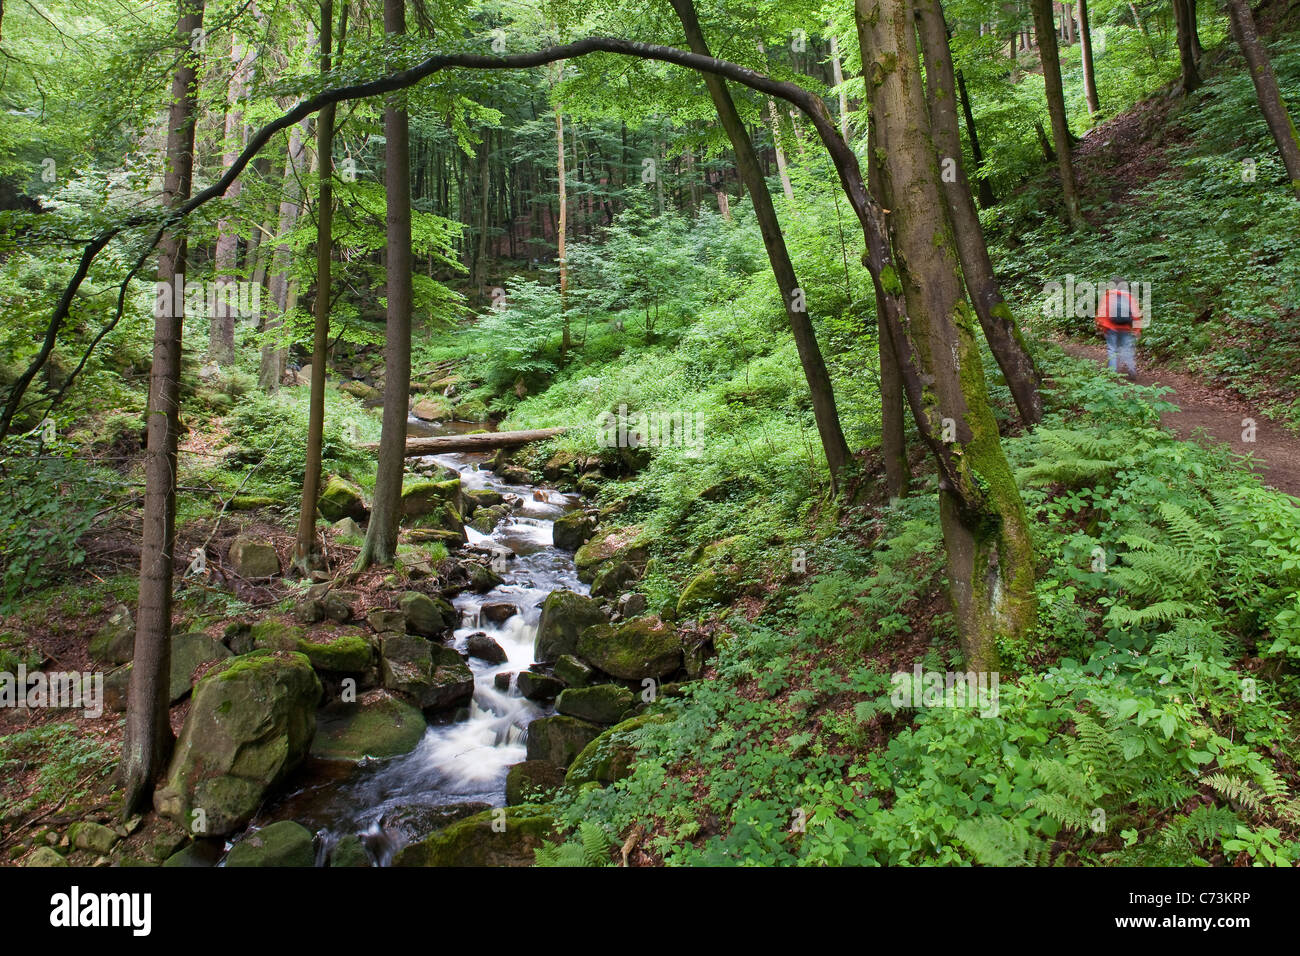 Heinrich Heine walking trail through the Harz Mountains along the Ilse river, Saxony Anhalt, Germany Stock Photo